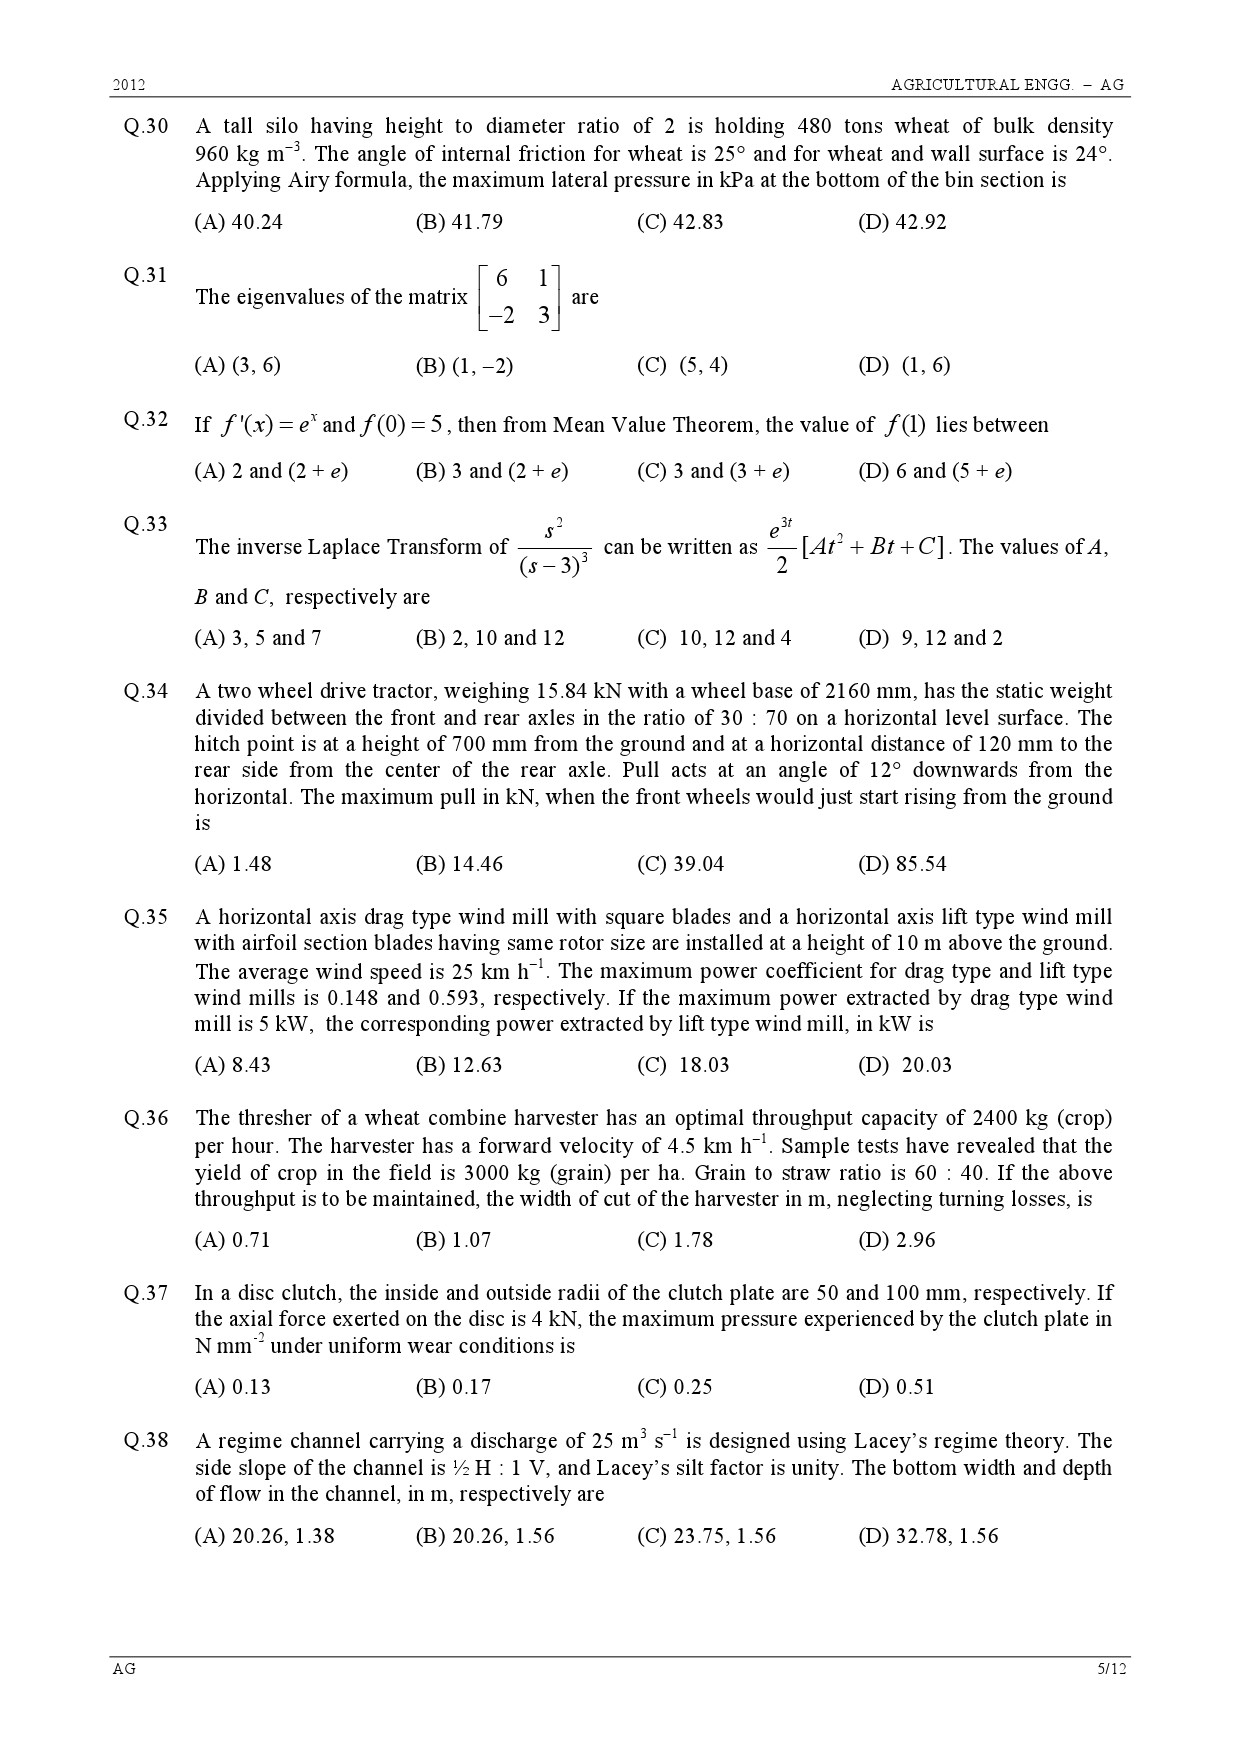 GATE Exam Question Paper 2012 Agricultural Engineering 5